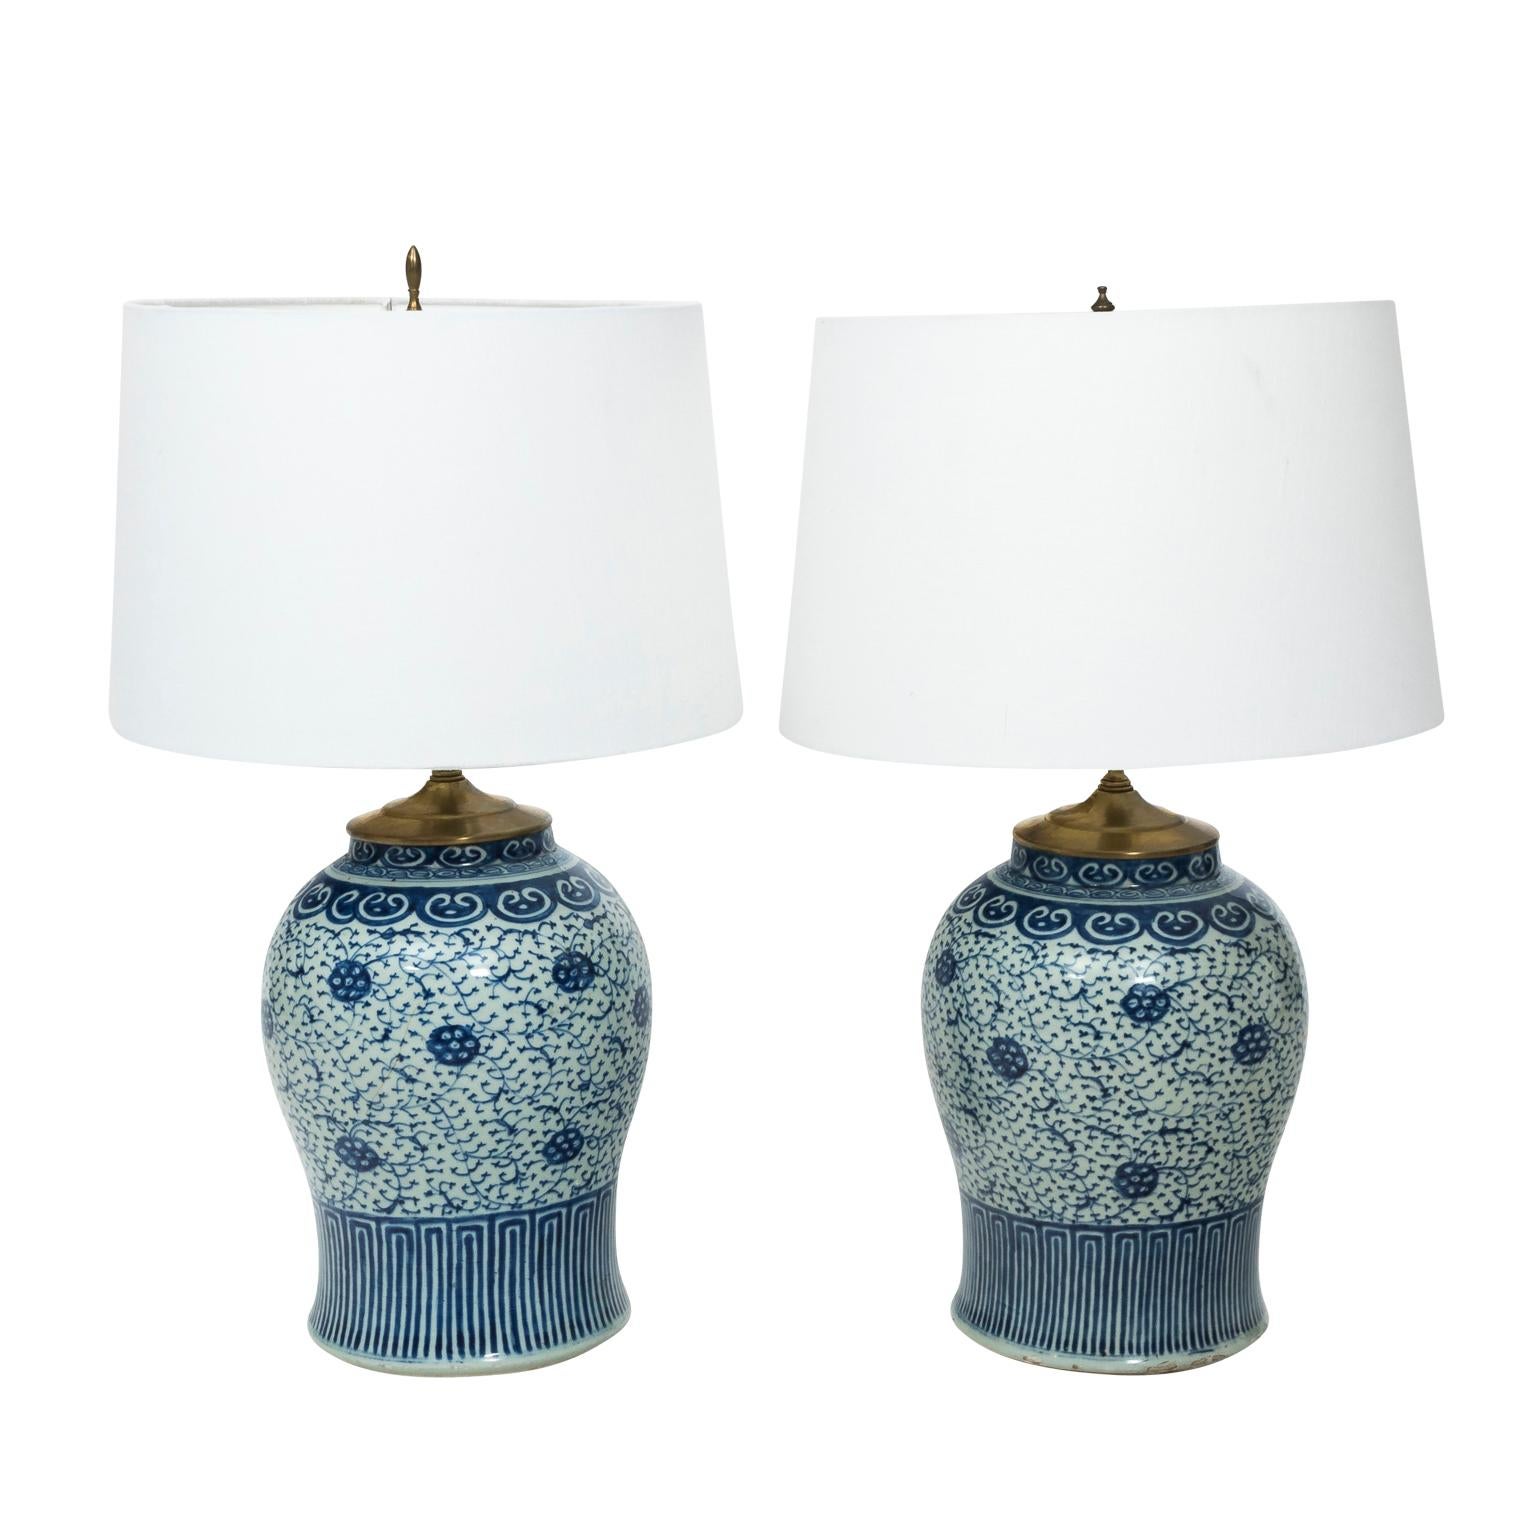 Pair of Blue and White Chinese Jar Lamps